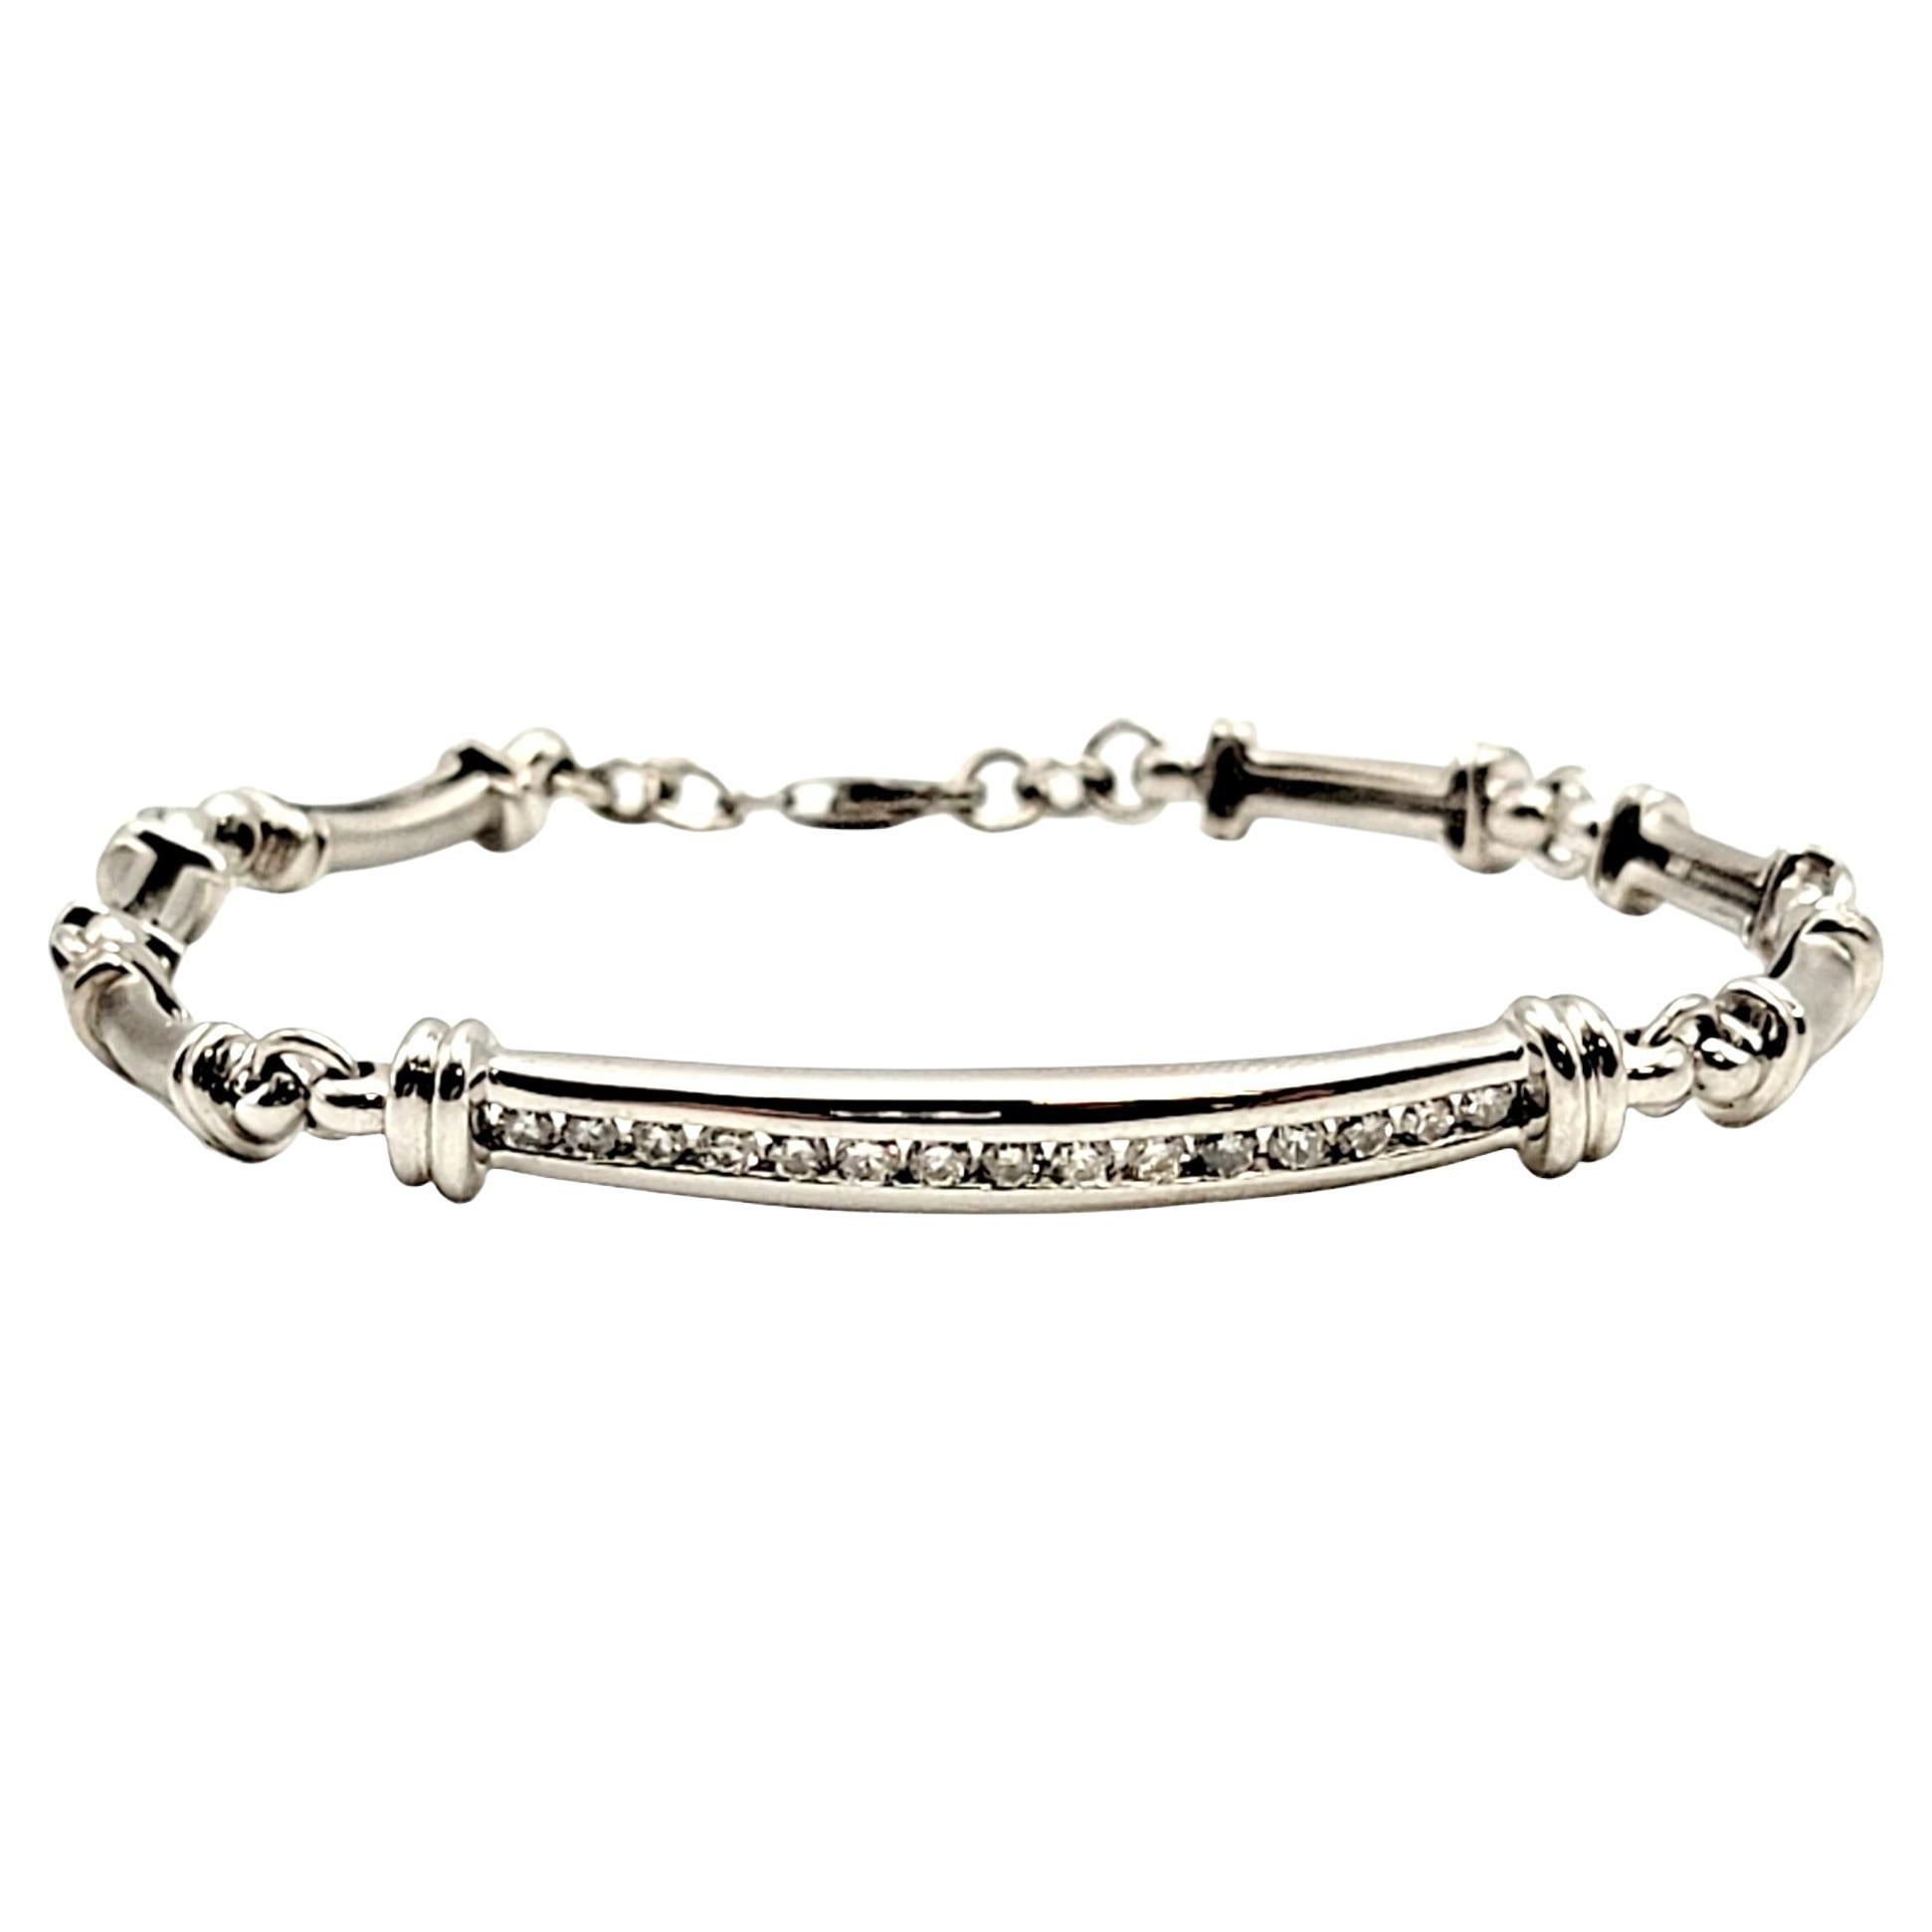 Elegant and modern bracelet sparkling with 15 icy white channel set natural diamonds. An elongated polished white gold bar link sits at the center, surrounded by brushed gold links. Sleek and sophisticated, this bracelet goes with just about